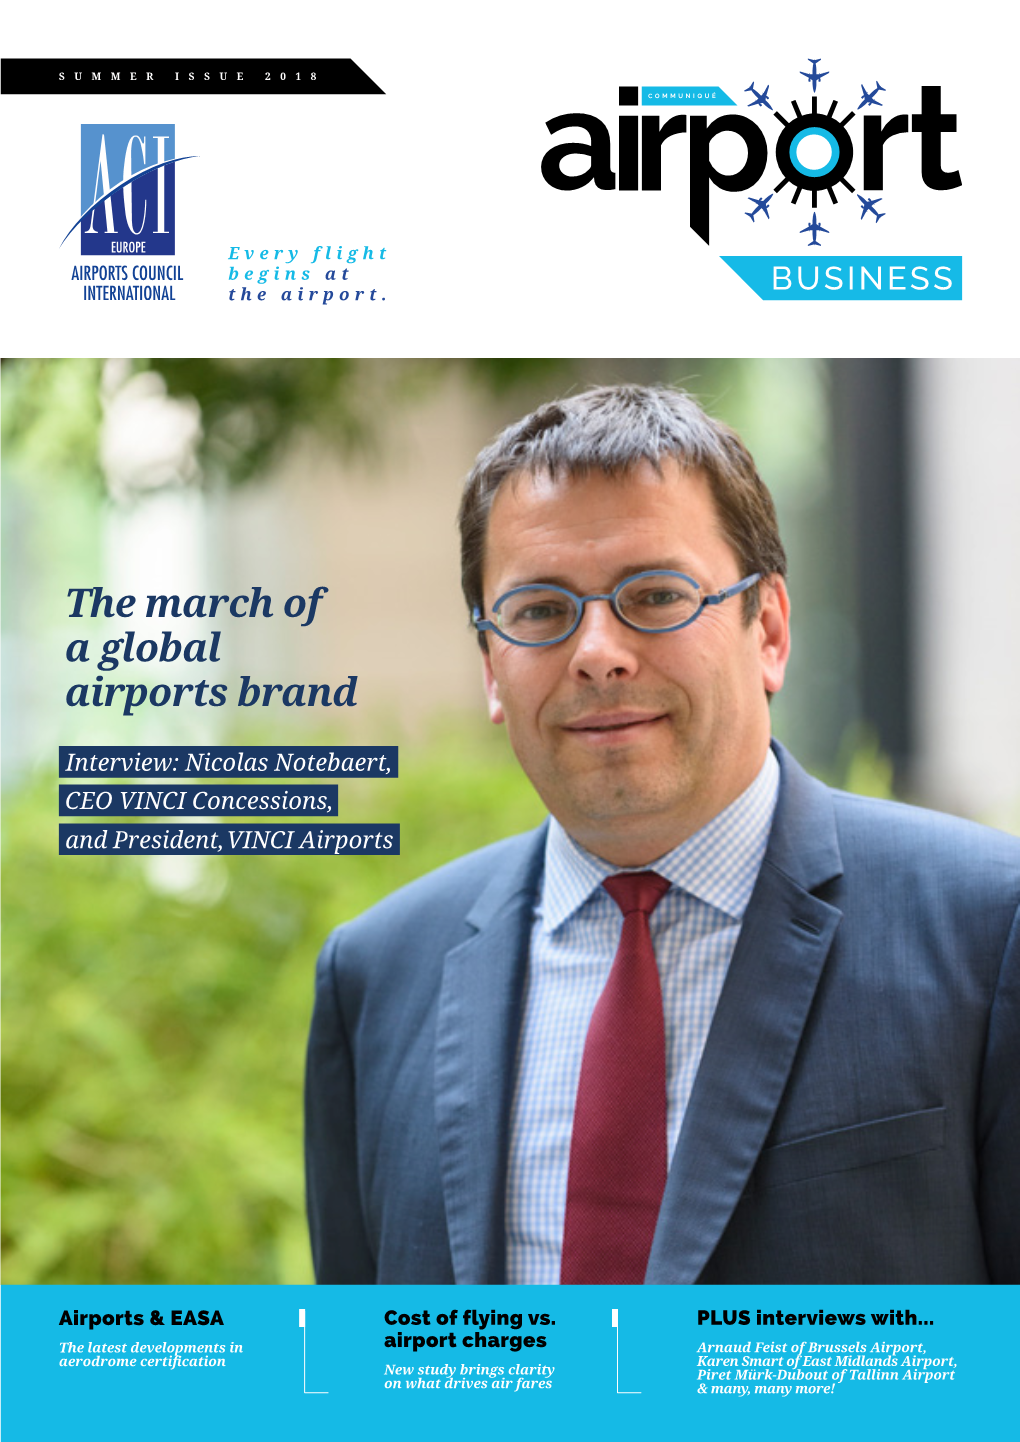 The March of a Global Airports Brand